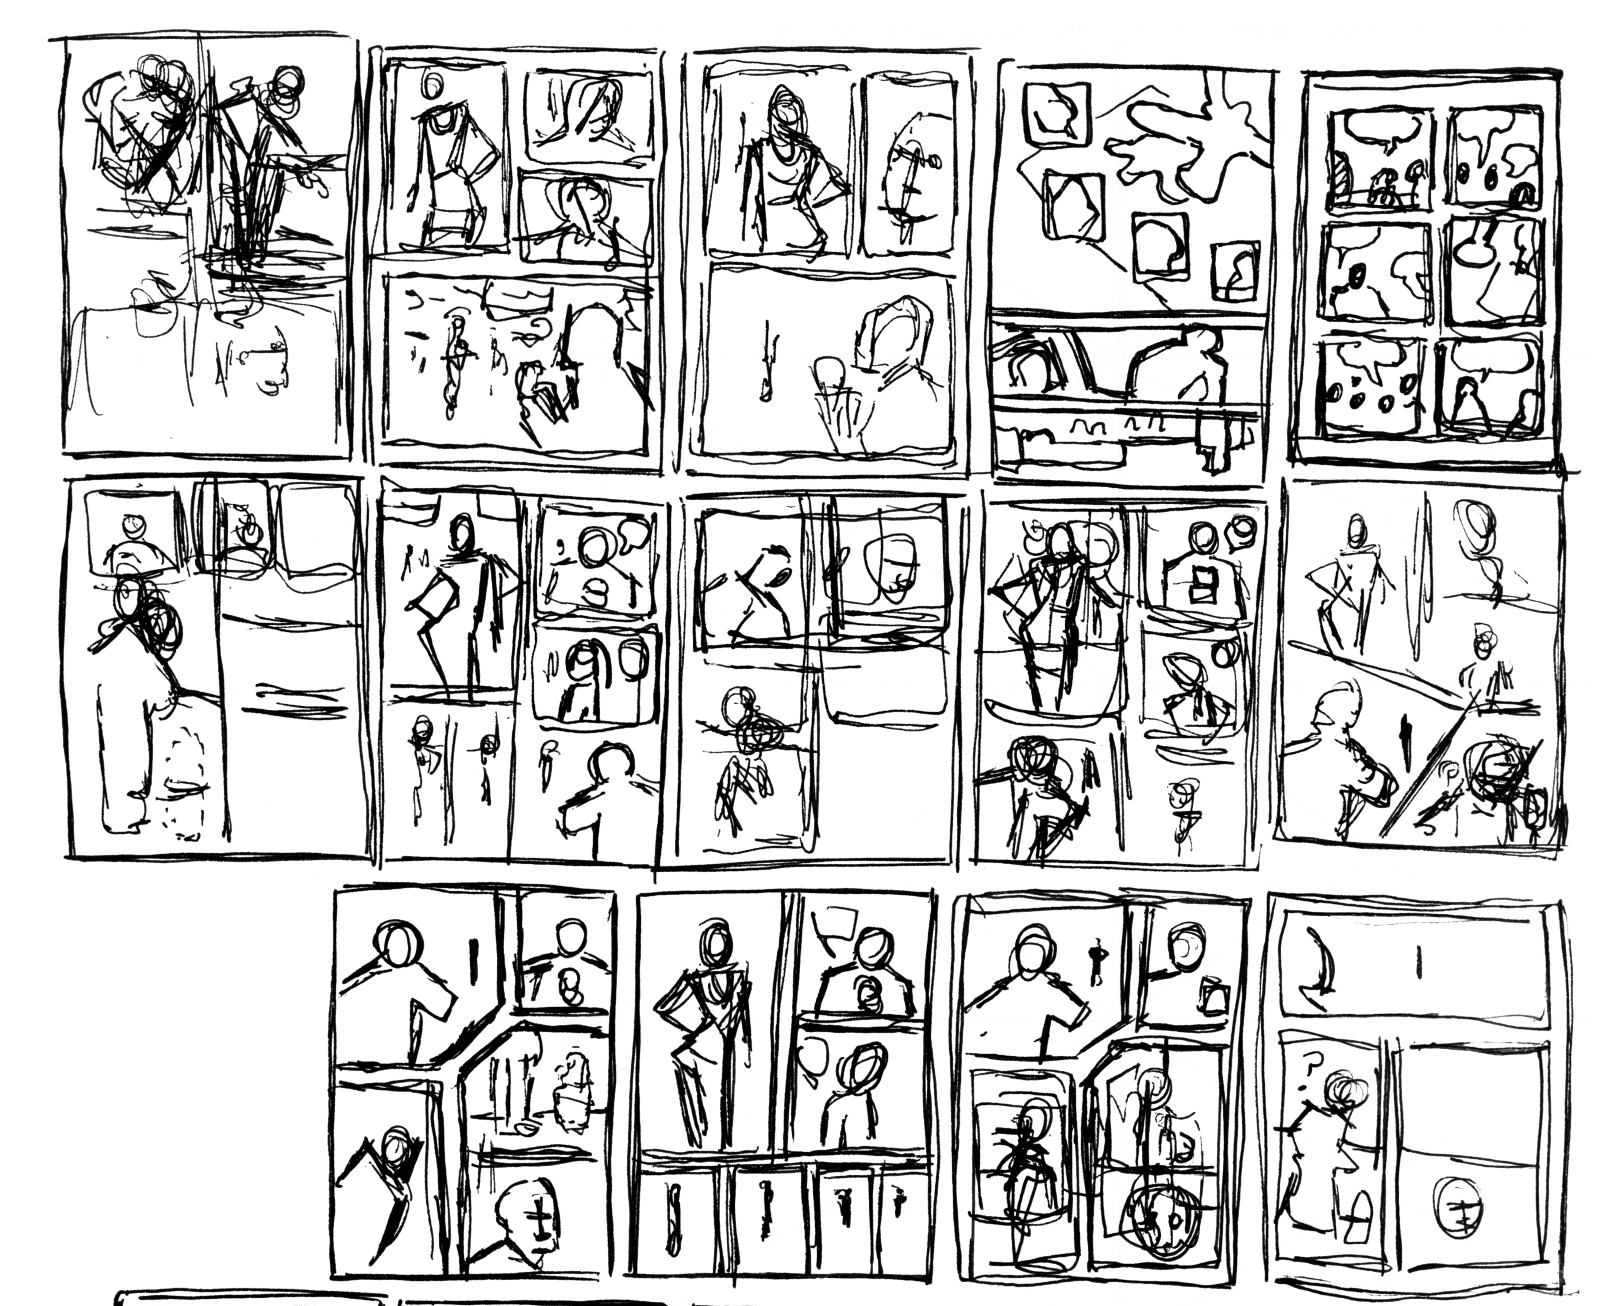 Some examples of thumbnails I did for this script